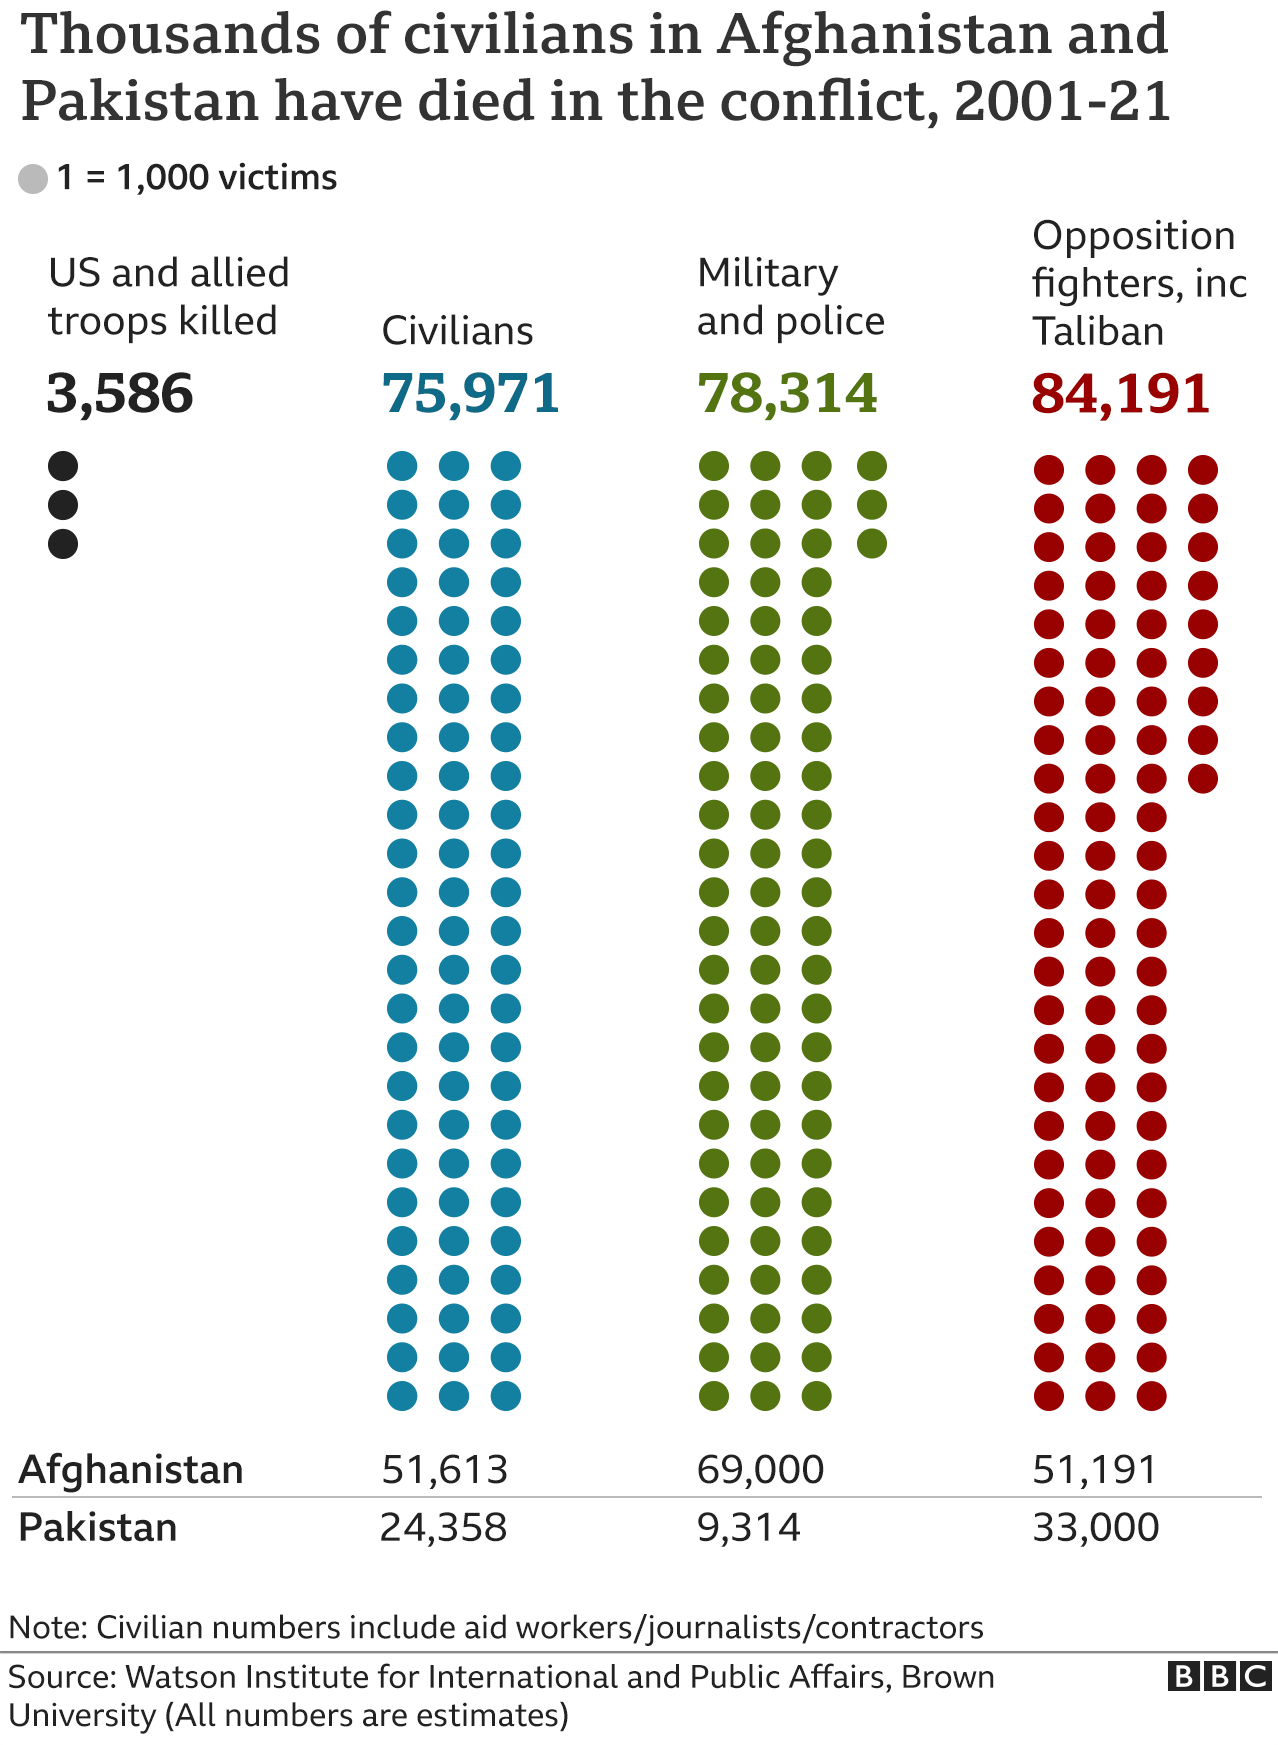 Chart showing numbers of people killed in the conflict and breakdown by troops/civilians etc